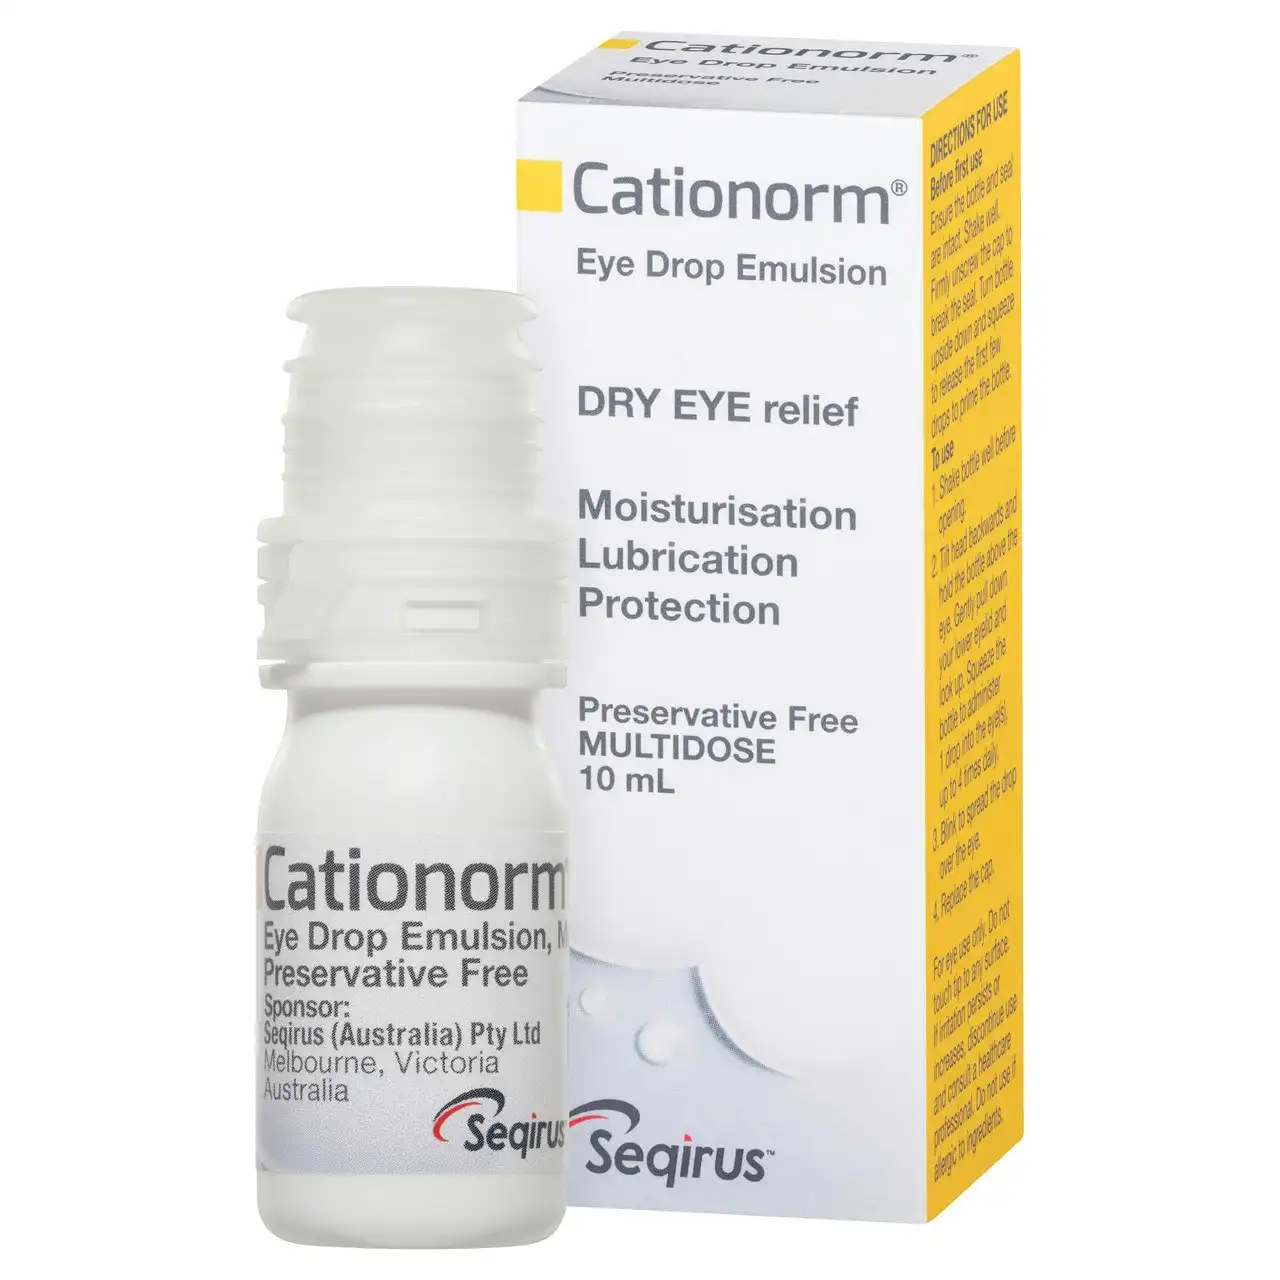 Cationorm Eye Drop Emulsion Dry Eye Relief 10mL